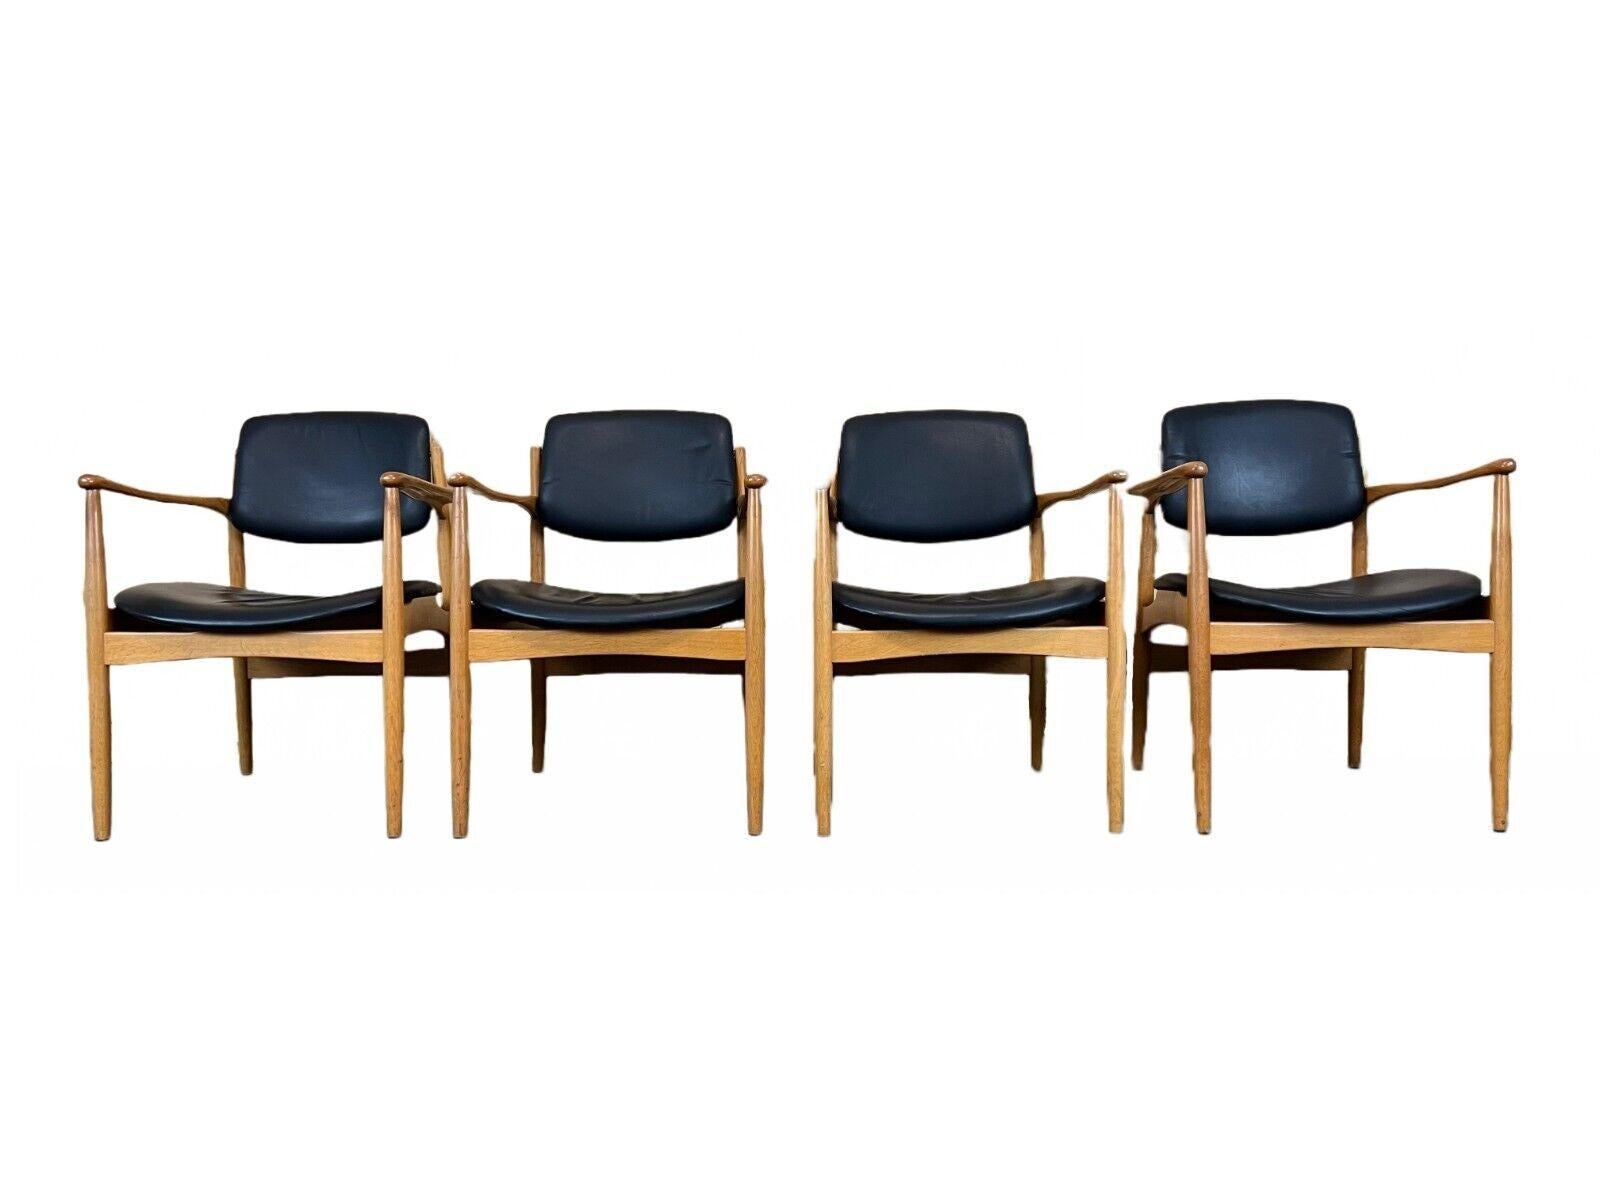 4x 60s 70s dining chair arm chair Danish design oak Denmark

Object: 4x armchairs

Manufacturer:

Condition: good - vintage

Age: around 1960-1970

Dimensions:

Width = 61.5cm
Depth = 63cm
Height = 82cm
Seat height = 42cm

Other notes:

A total of